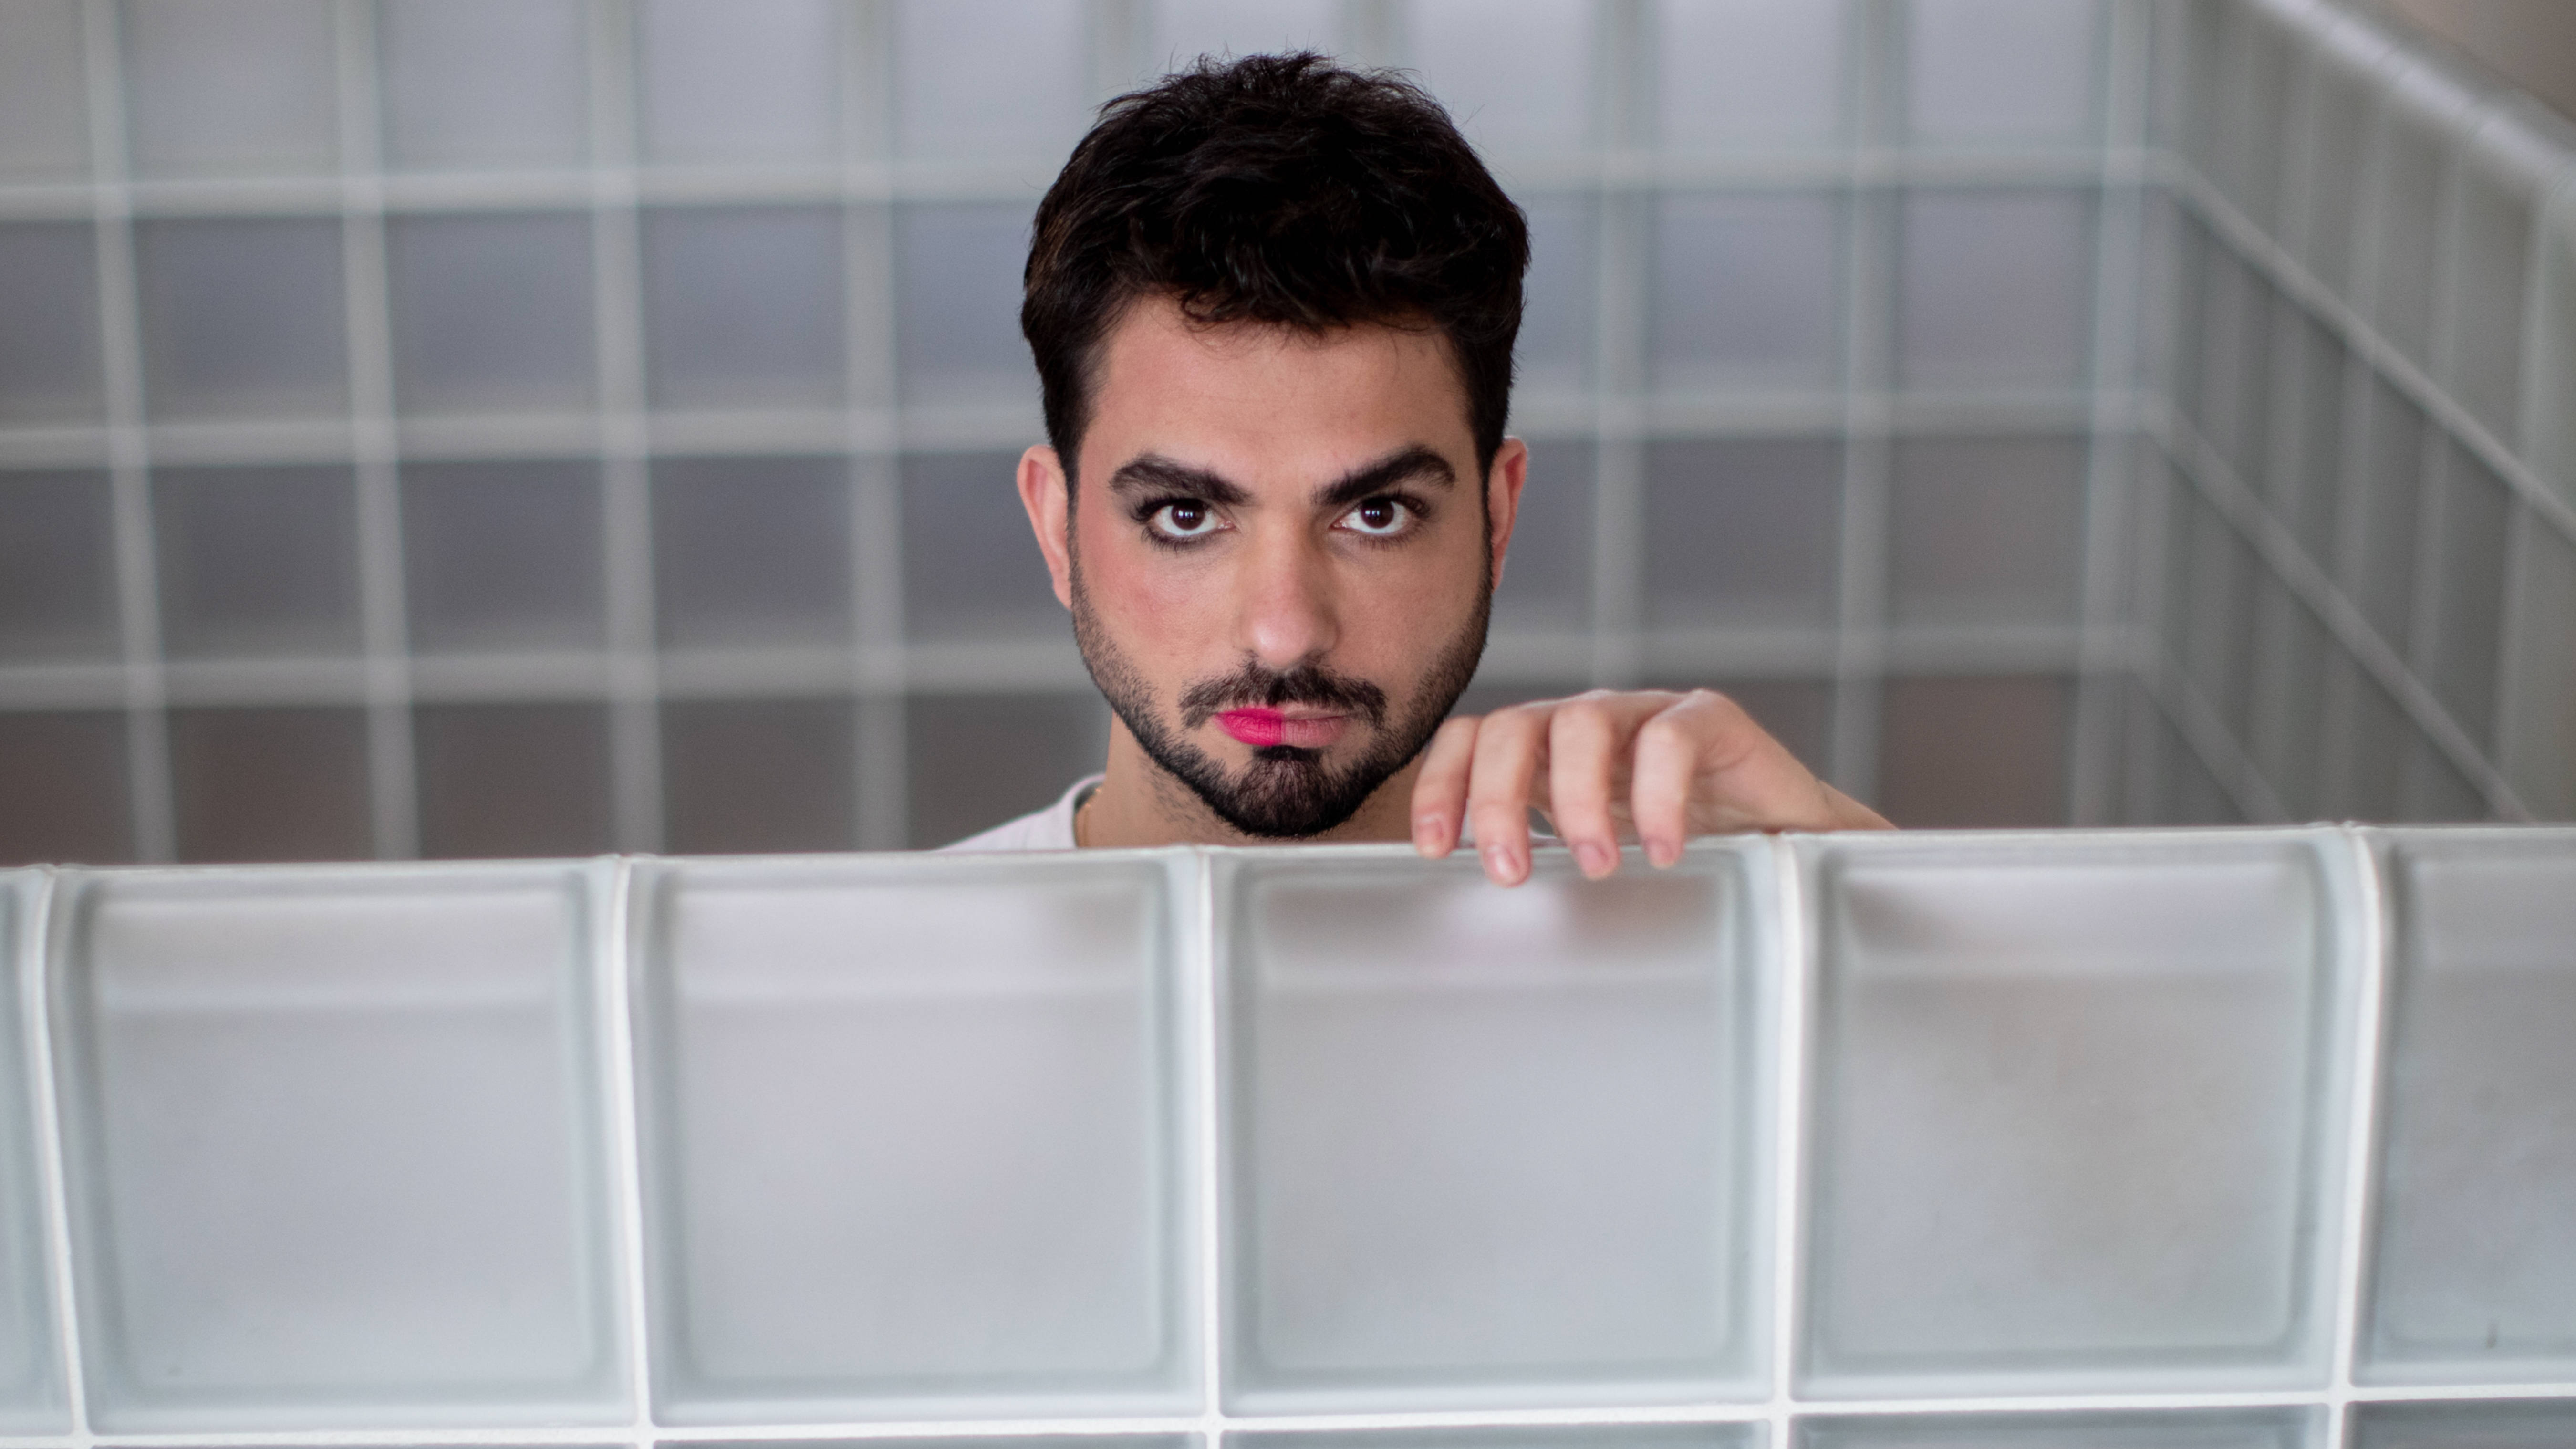 'Returning or even visiting my country for a vacation has become an impossible dream,' says Bash, an Iraqi artist and LGBTQ+ activist based in Berlin (Sebastian Backhaus/MEE) 